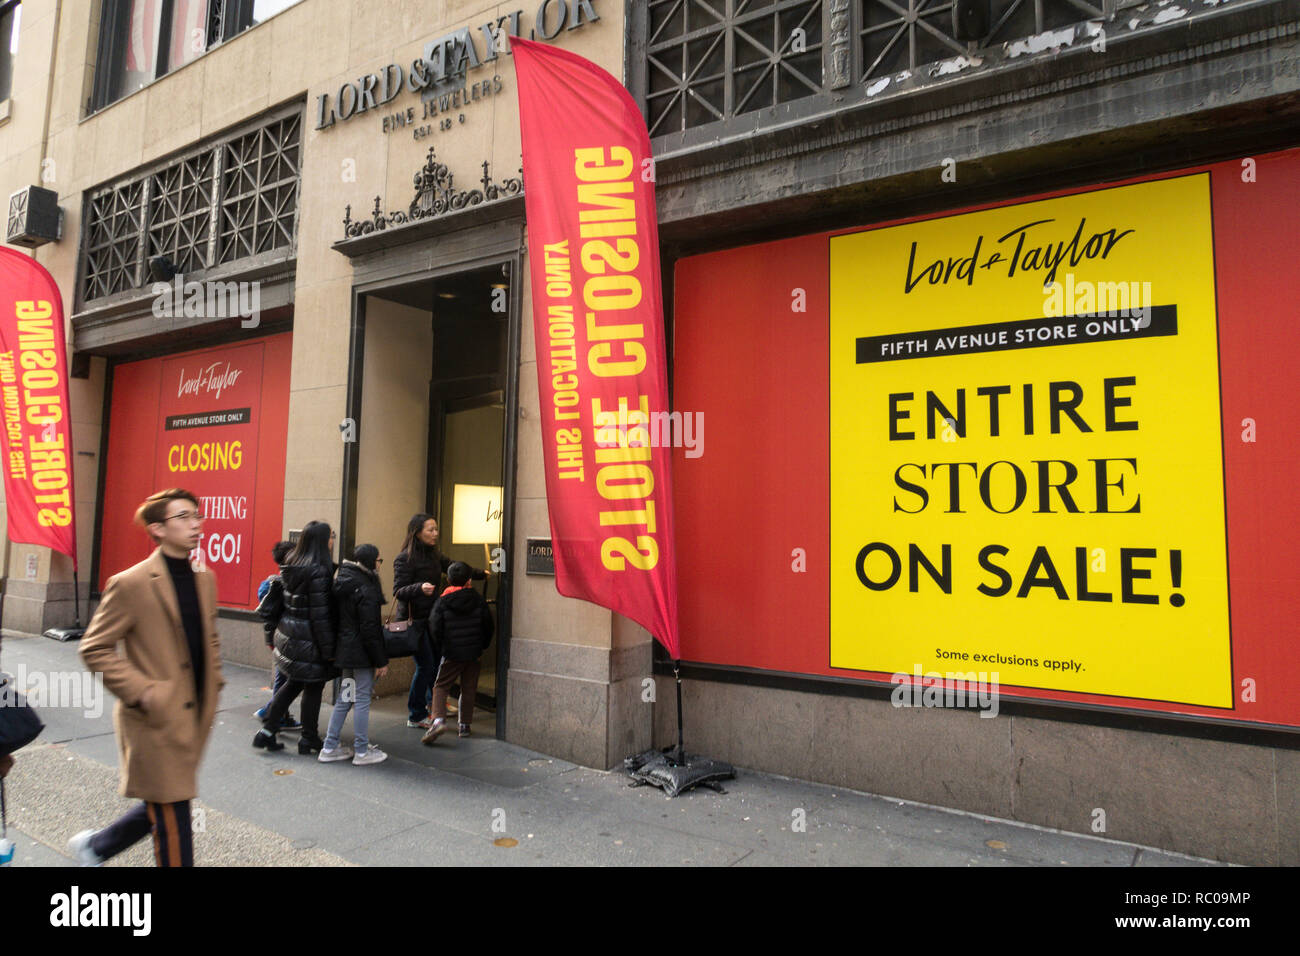 Iconic Lord & Taylor Department Store on Fifth Avenue Closes its Doors, New York City, USA Stock Photo